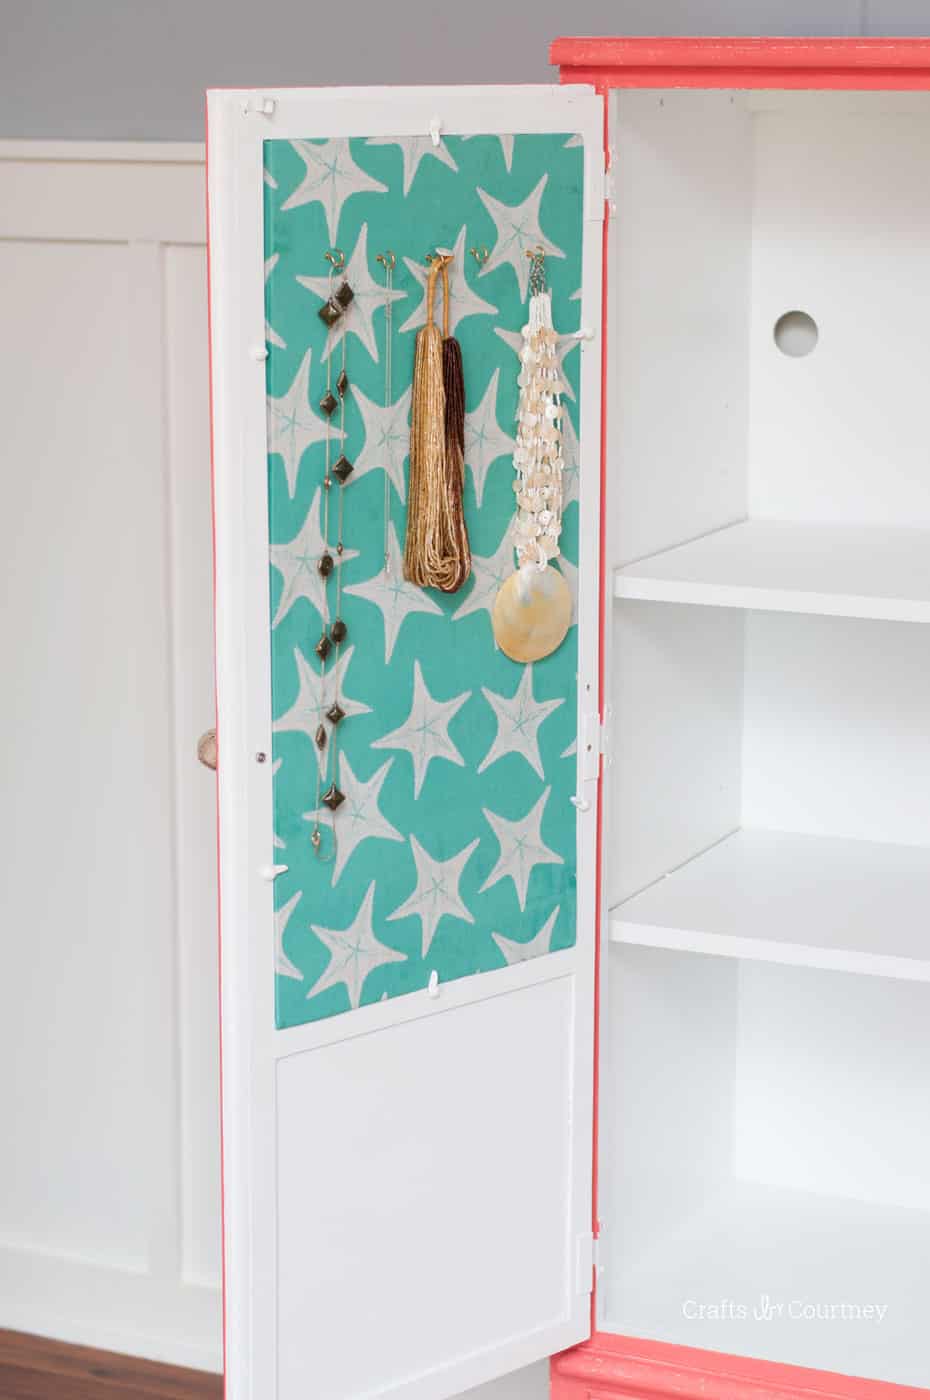 Courtney revamped her bathroom cabinet with pretty paint colors - and turned the inside into a cork board jewelry organizer with Mod Podge and fabric!